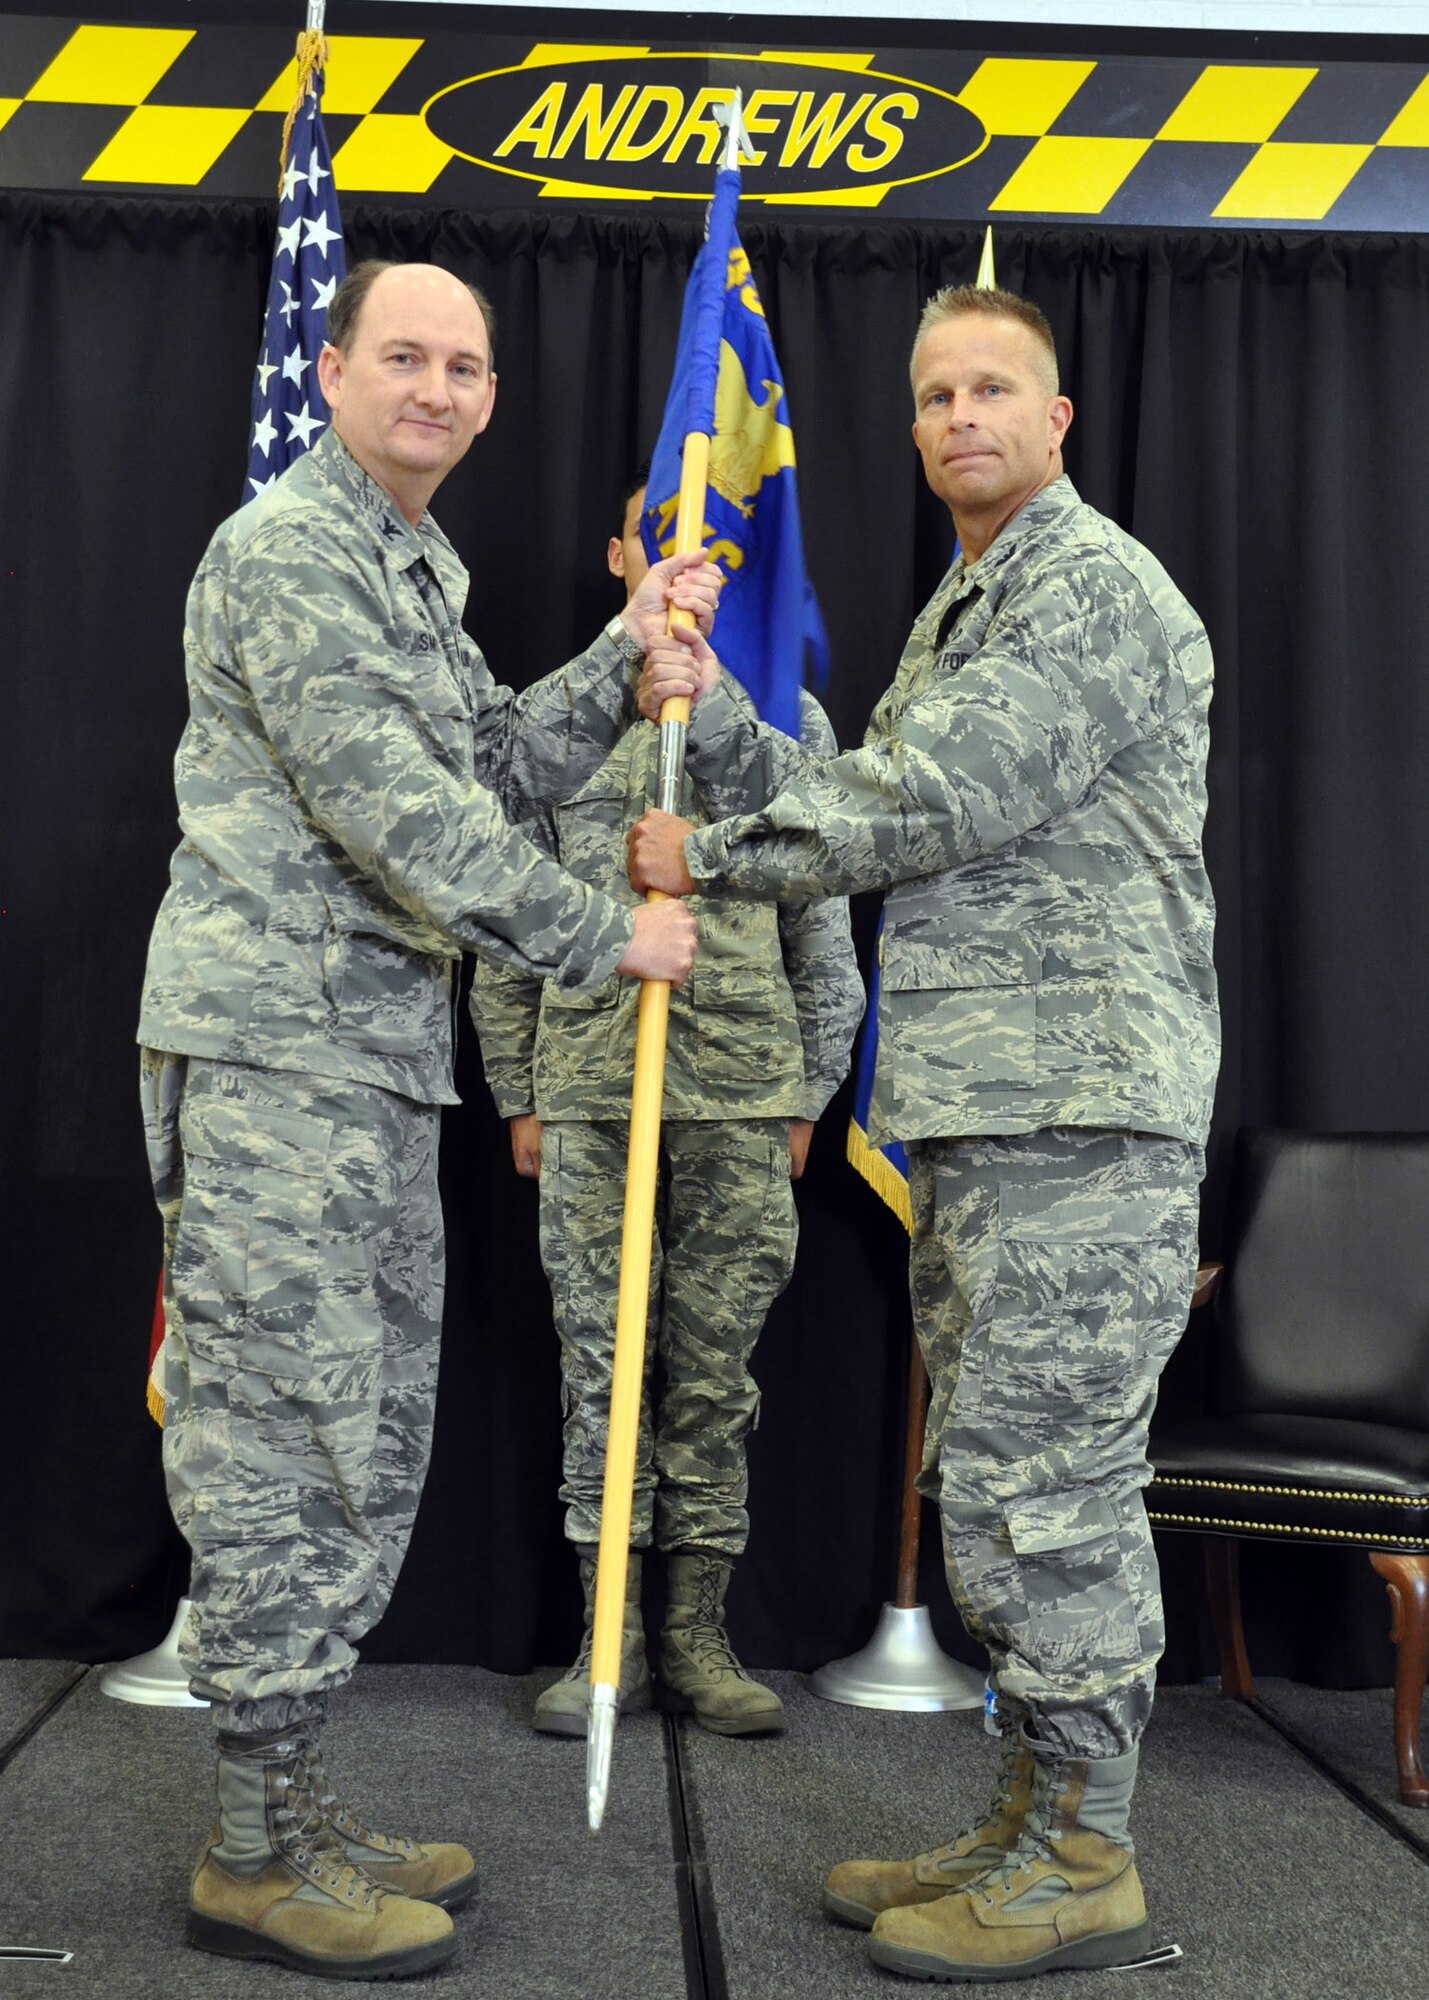 Col. Thomas K. Smith Jr., 459th Air Refueling Wing commander, Joint Base Andrews, Md., passes the guidon to Col. Roger S. Law, during the 459th Maintenance Group Assumption of Command ceremony held on September 12th, 2015. This will be Col. Law’s third maintenance commander position.  (U.S. Air Force photo / Senior Airman Kristin Kurtz)